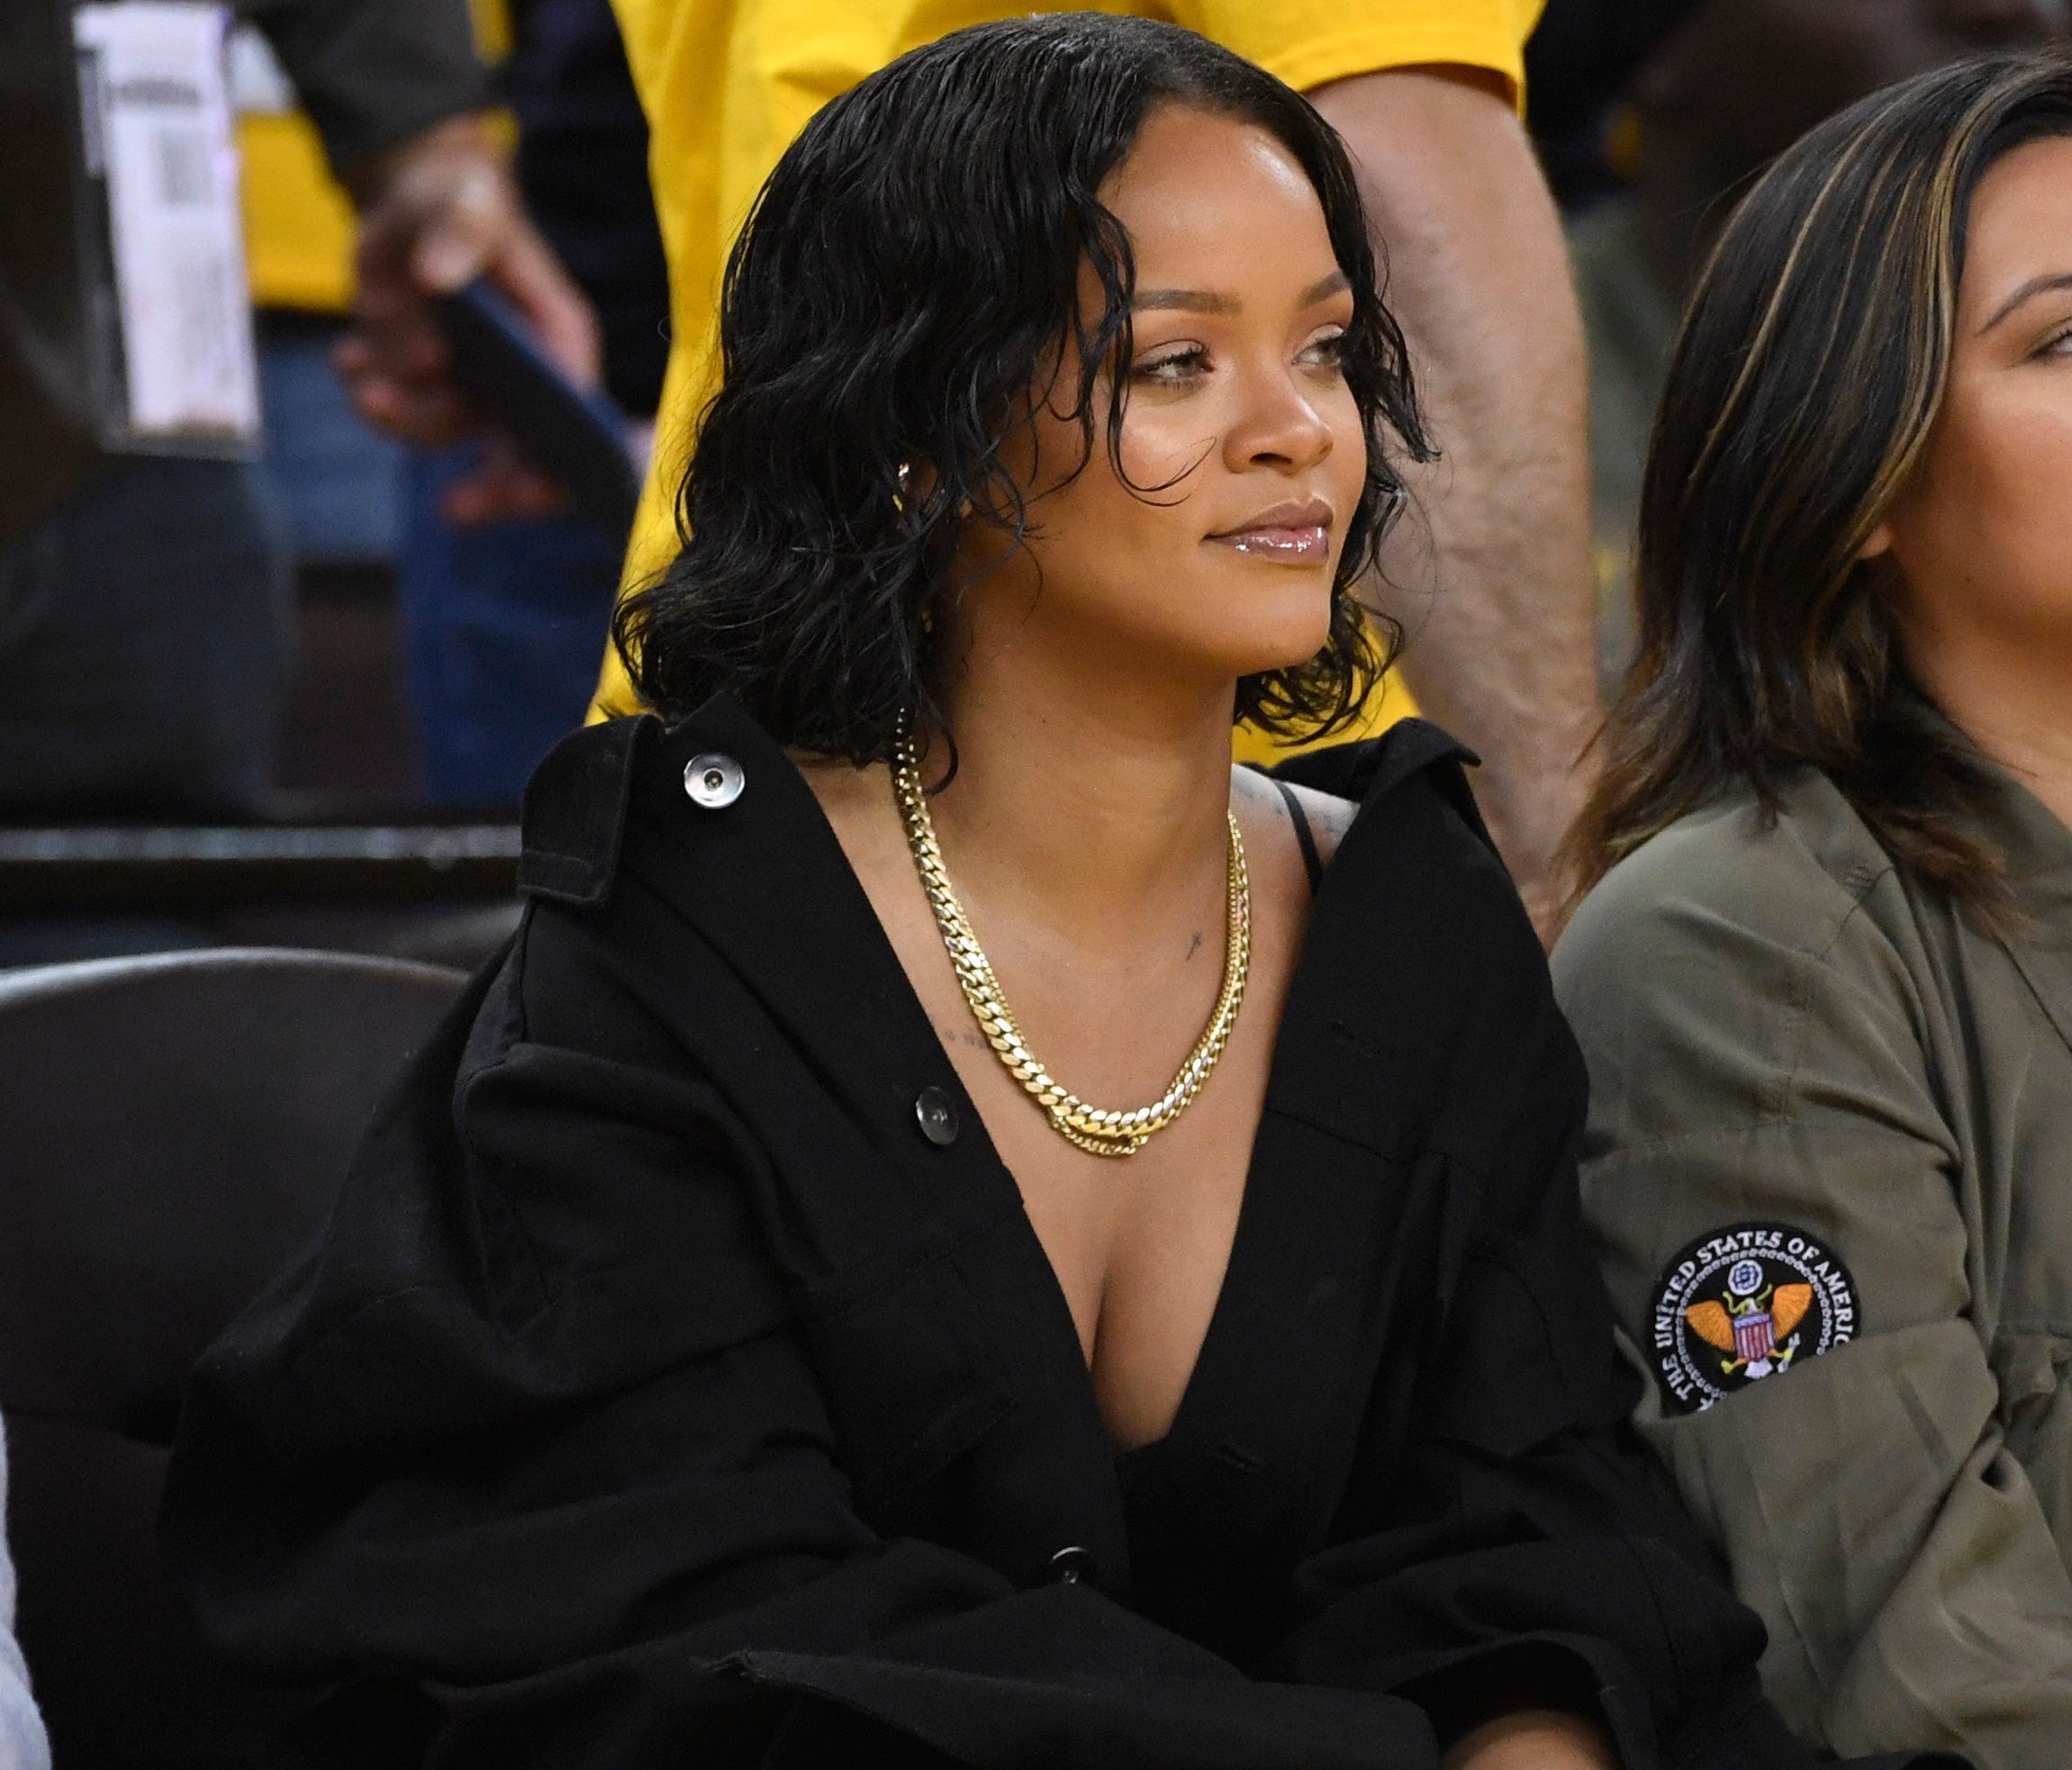 Kevin Durant may or may not have had words for Rihanna during Game 1.